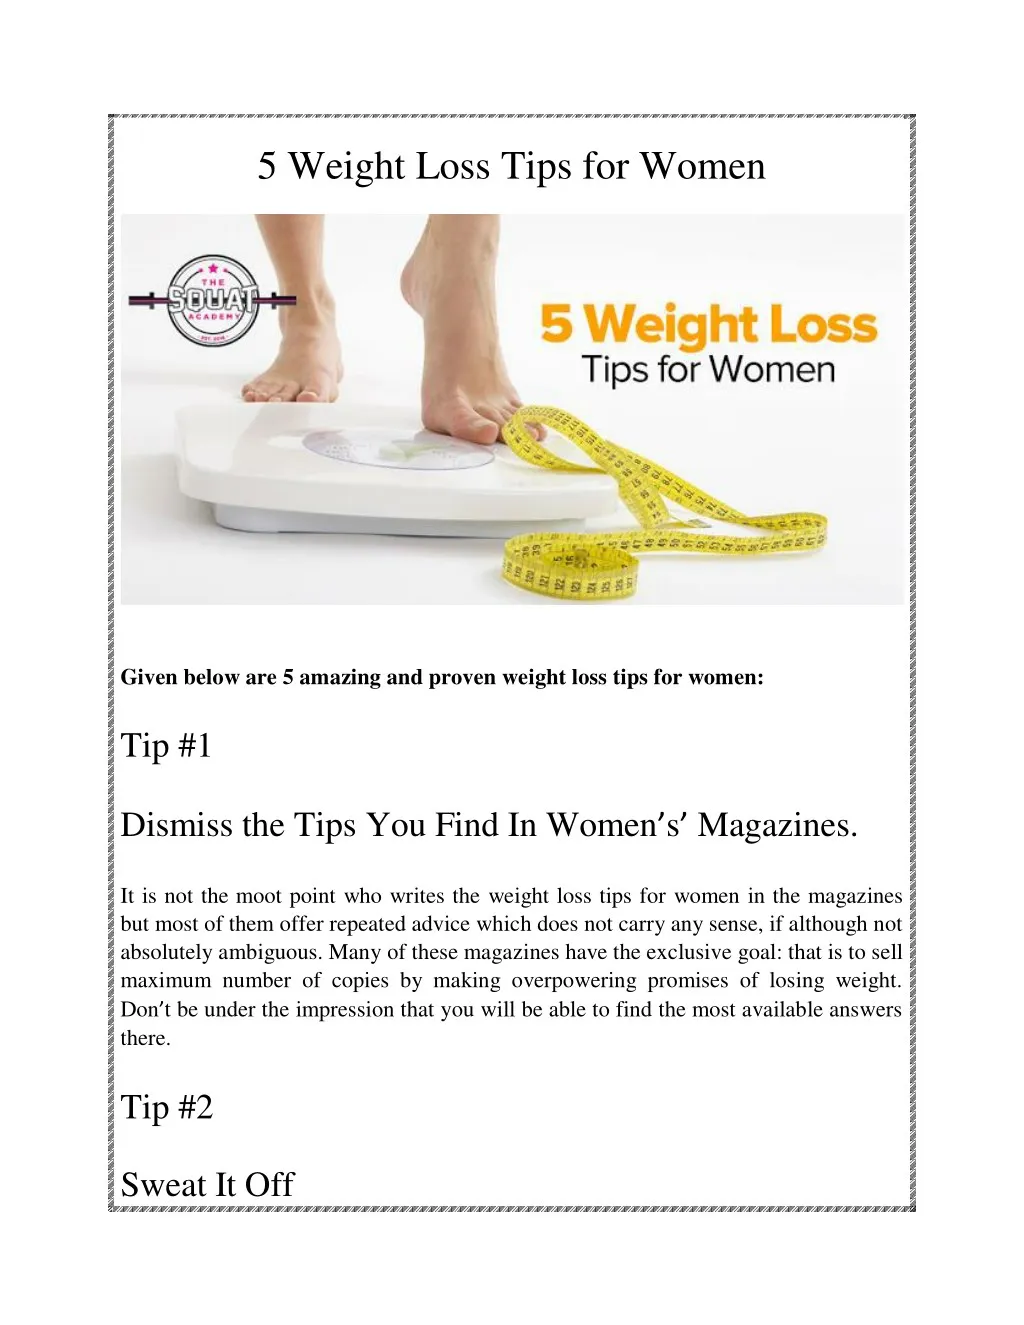 5 weight loss tips for women